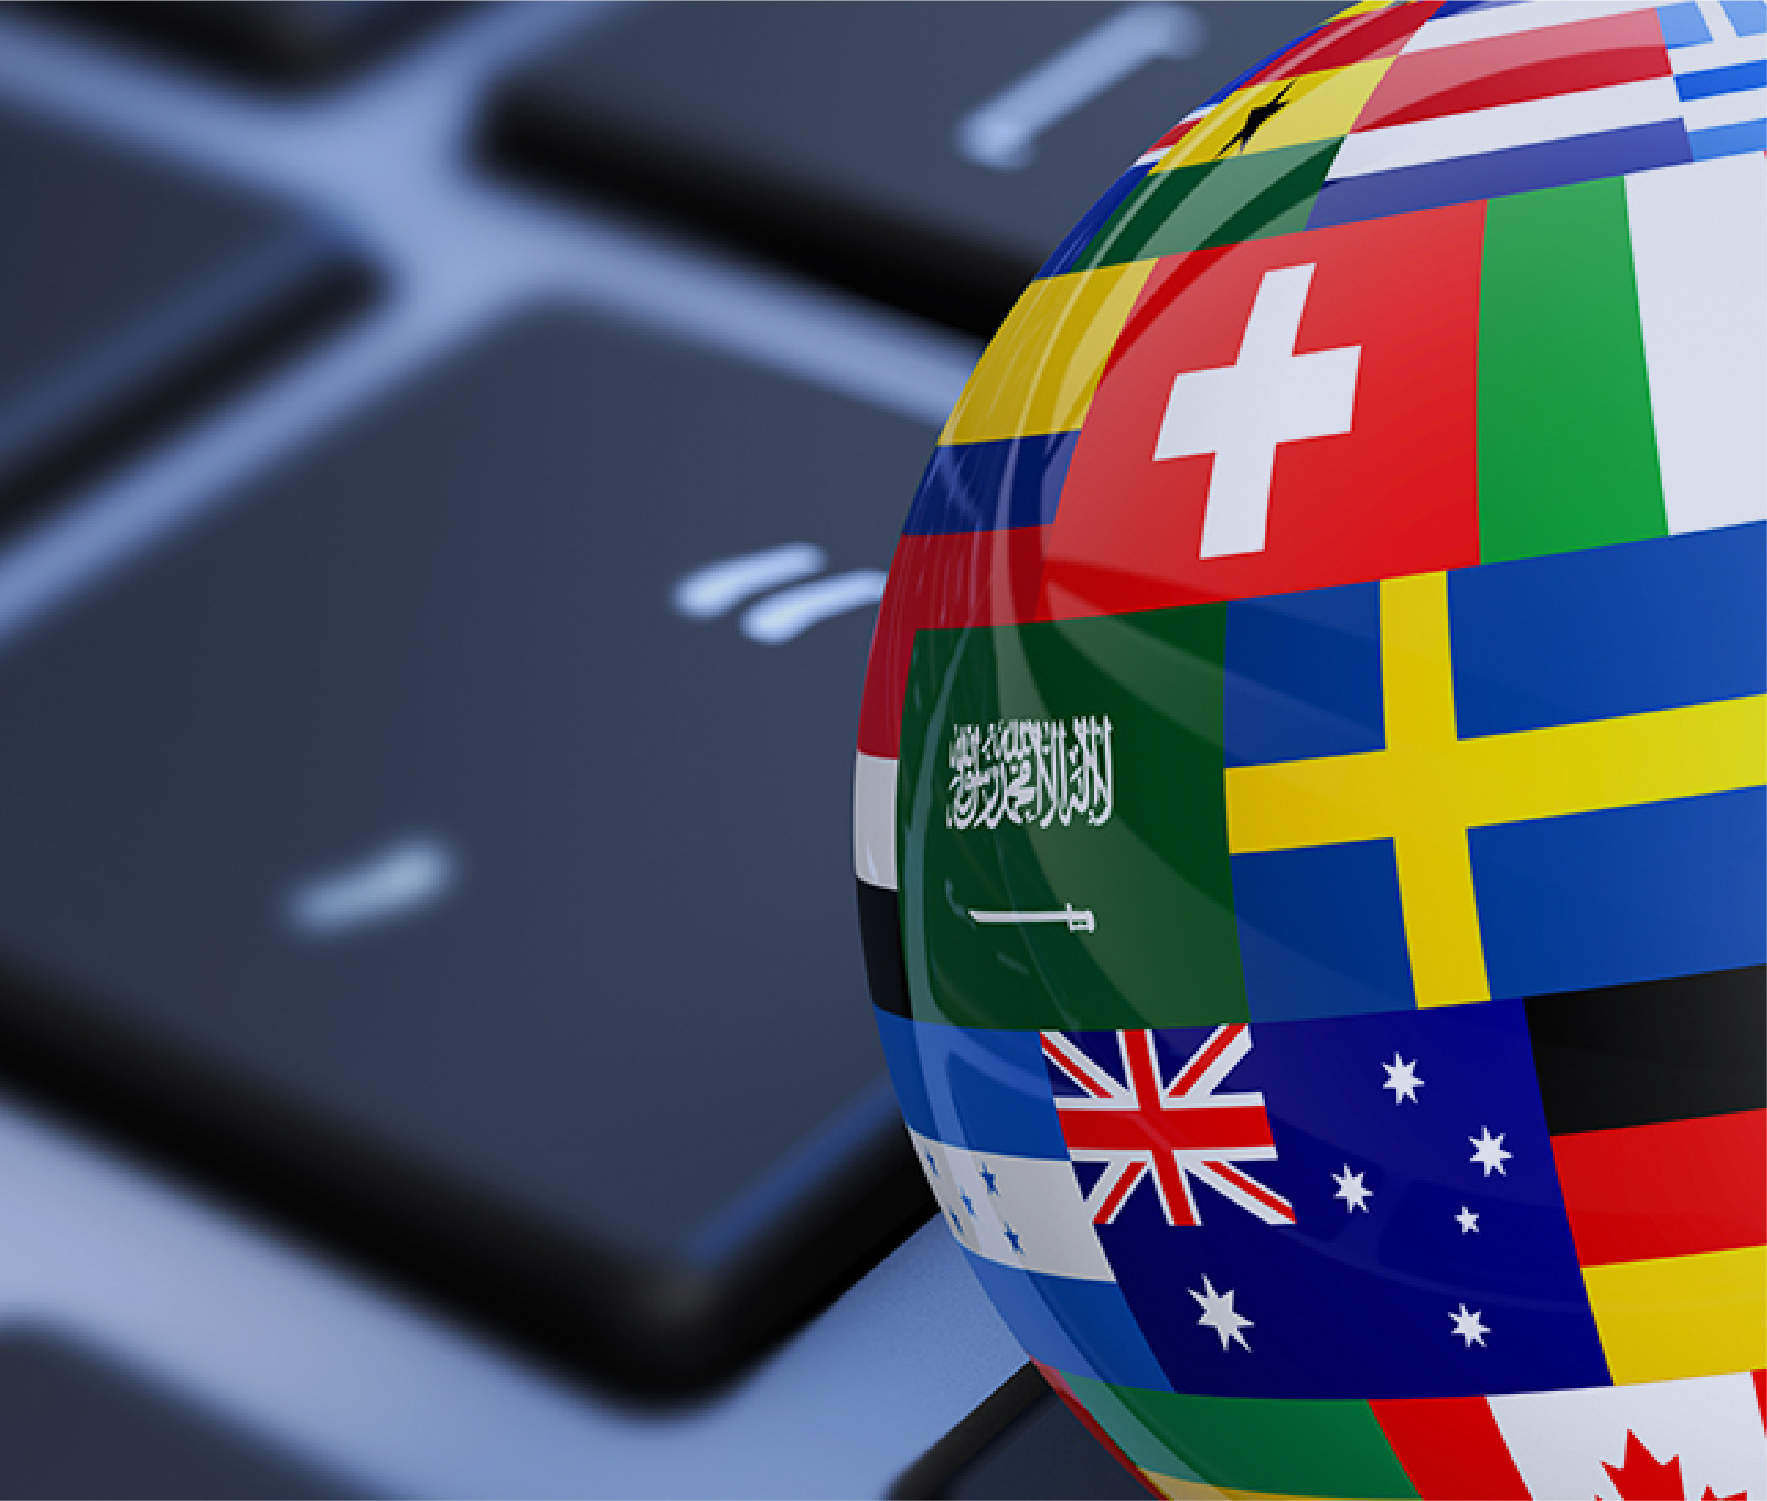 Globe with flags on computer keyboard